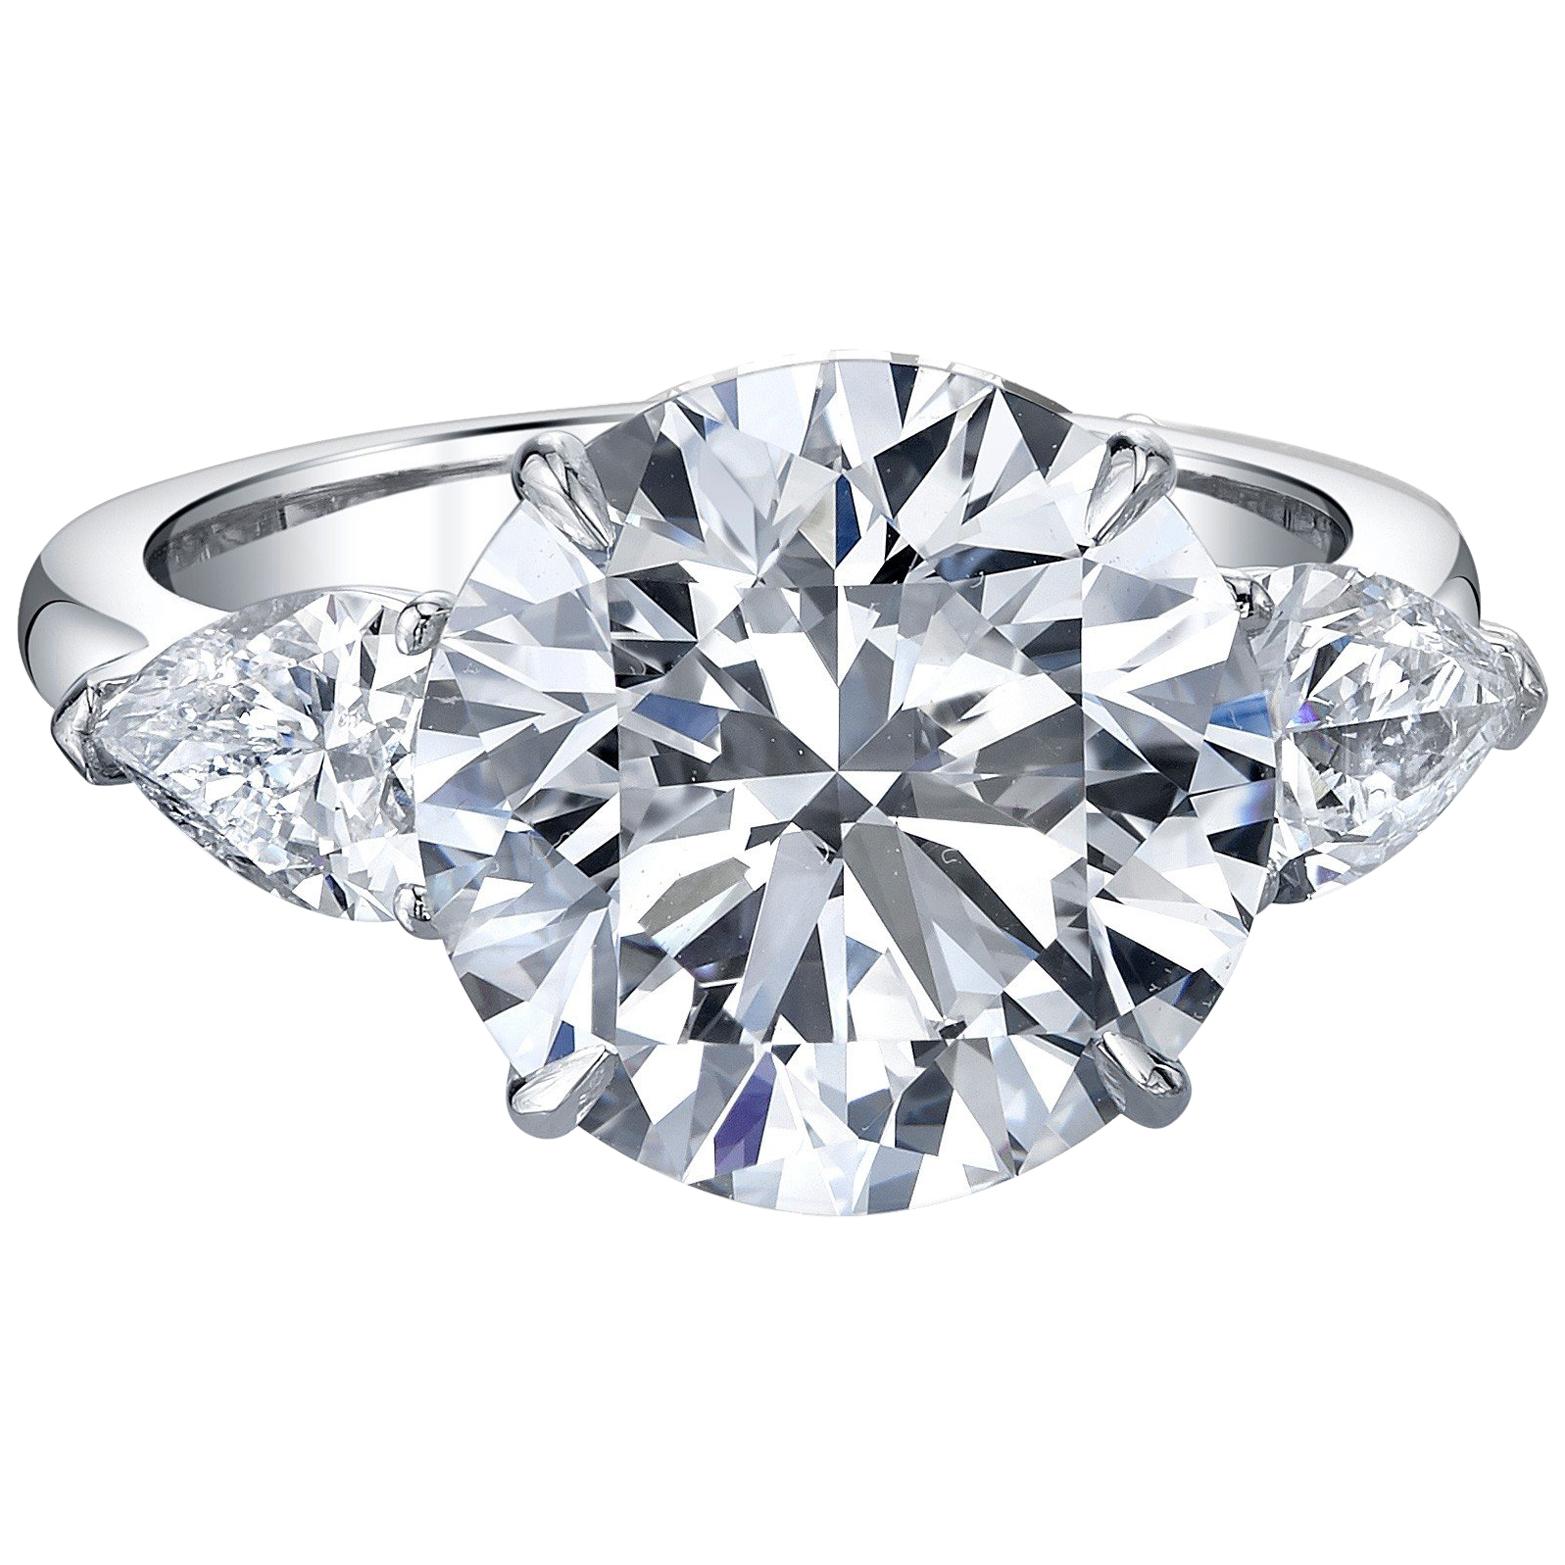 3 GIA Round Cut Diamond Engagement in Platinum 950 Setting For Sale